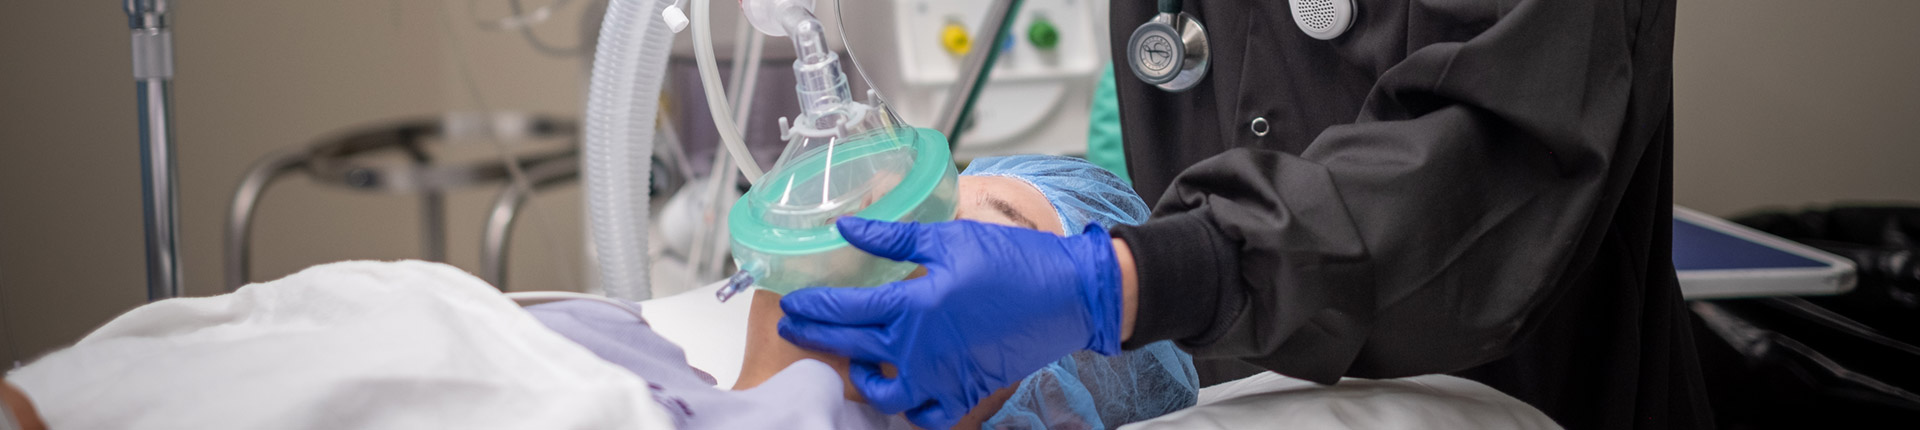 SOD first to offer anesthesia training to hygiene students - University of  Mississippi Medical Center